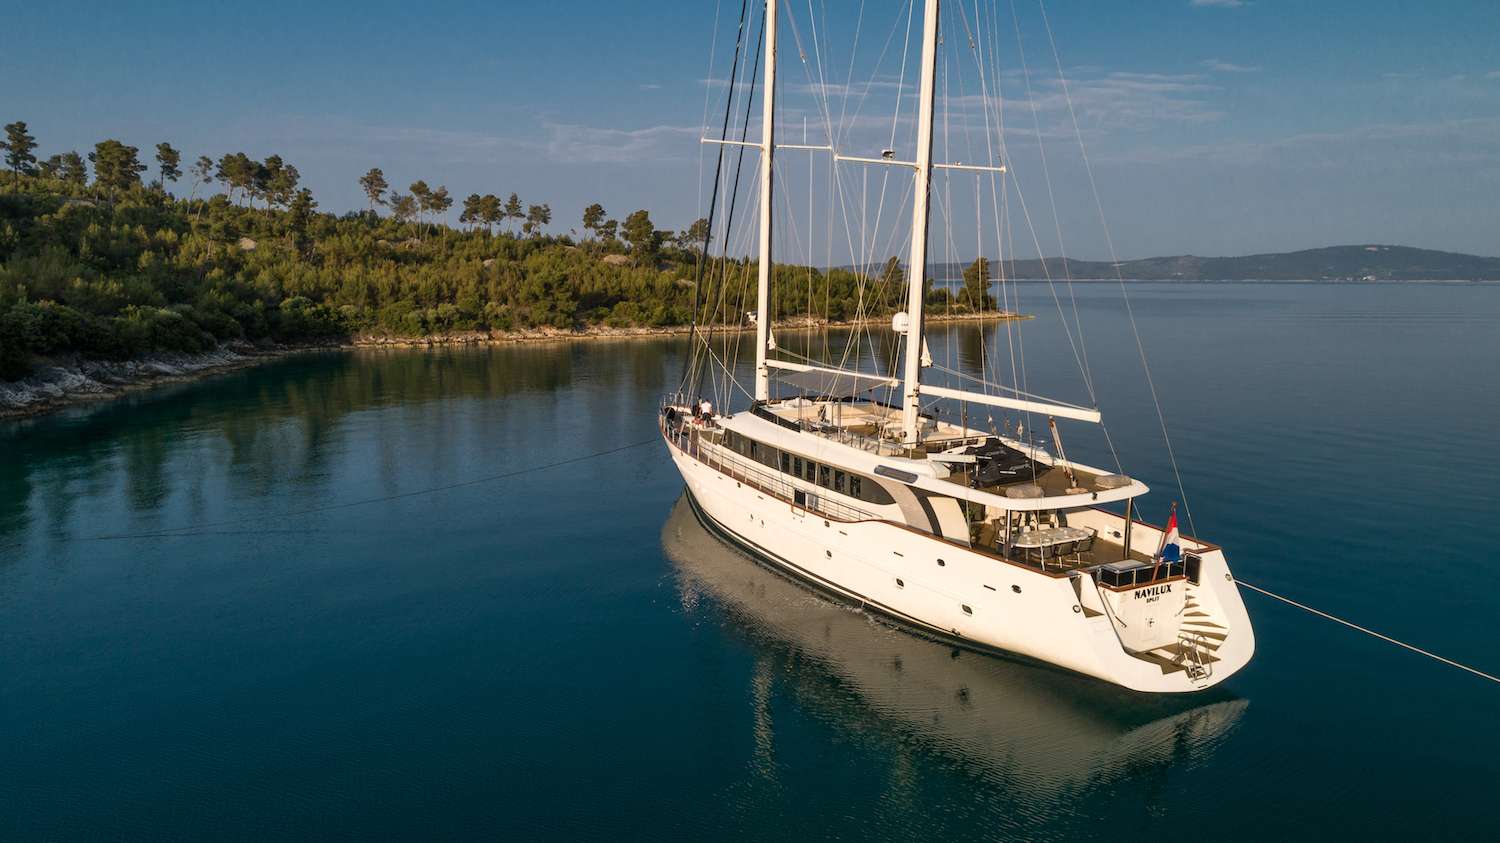 NAVILUX Yacht Charter - At anchor